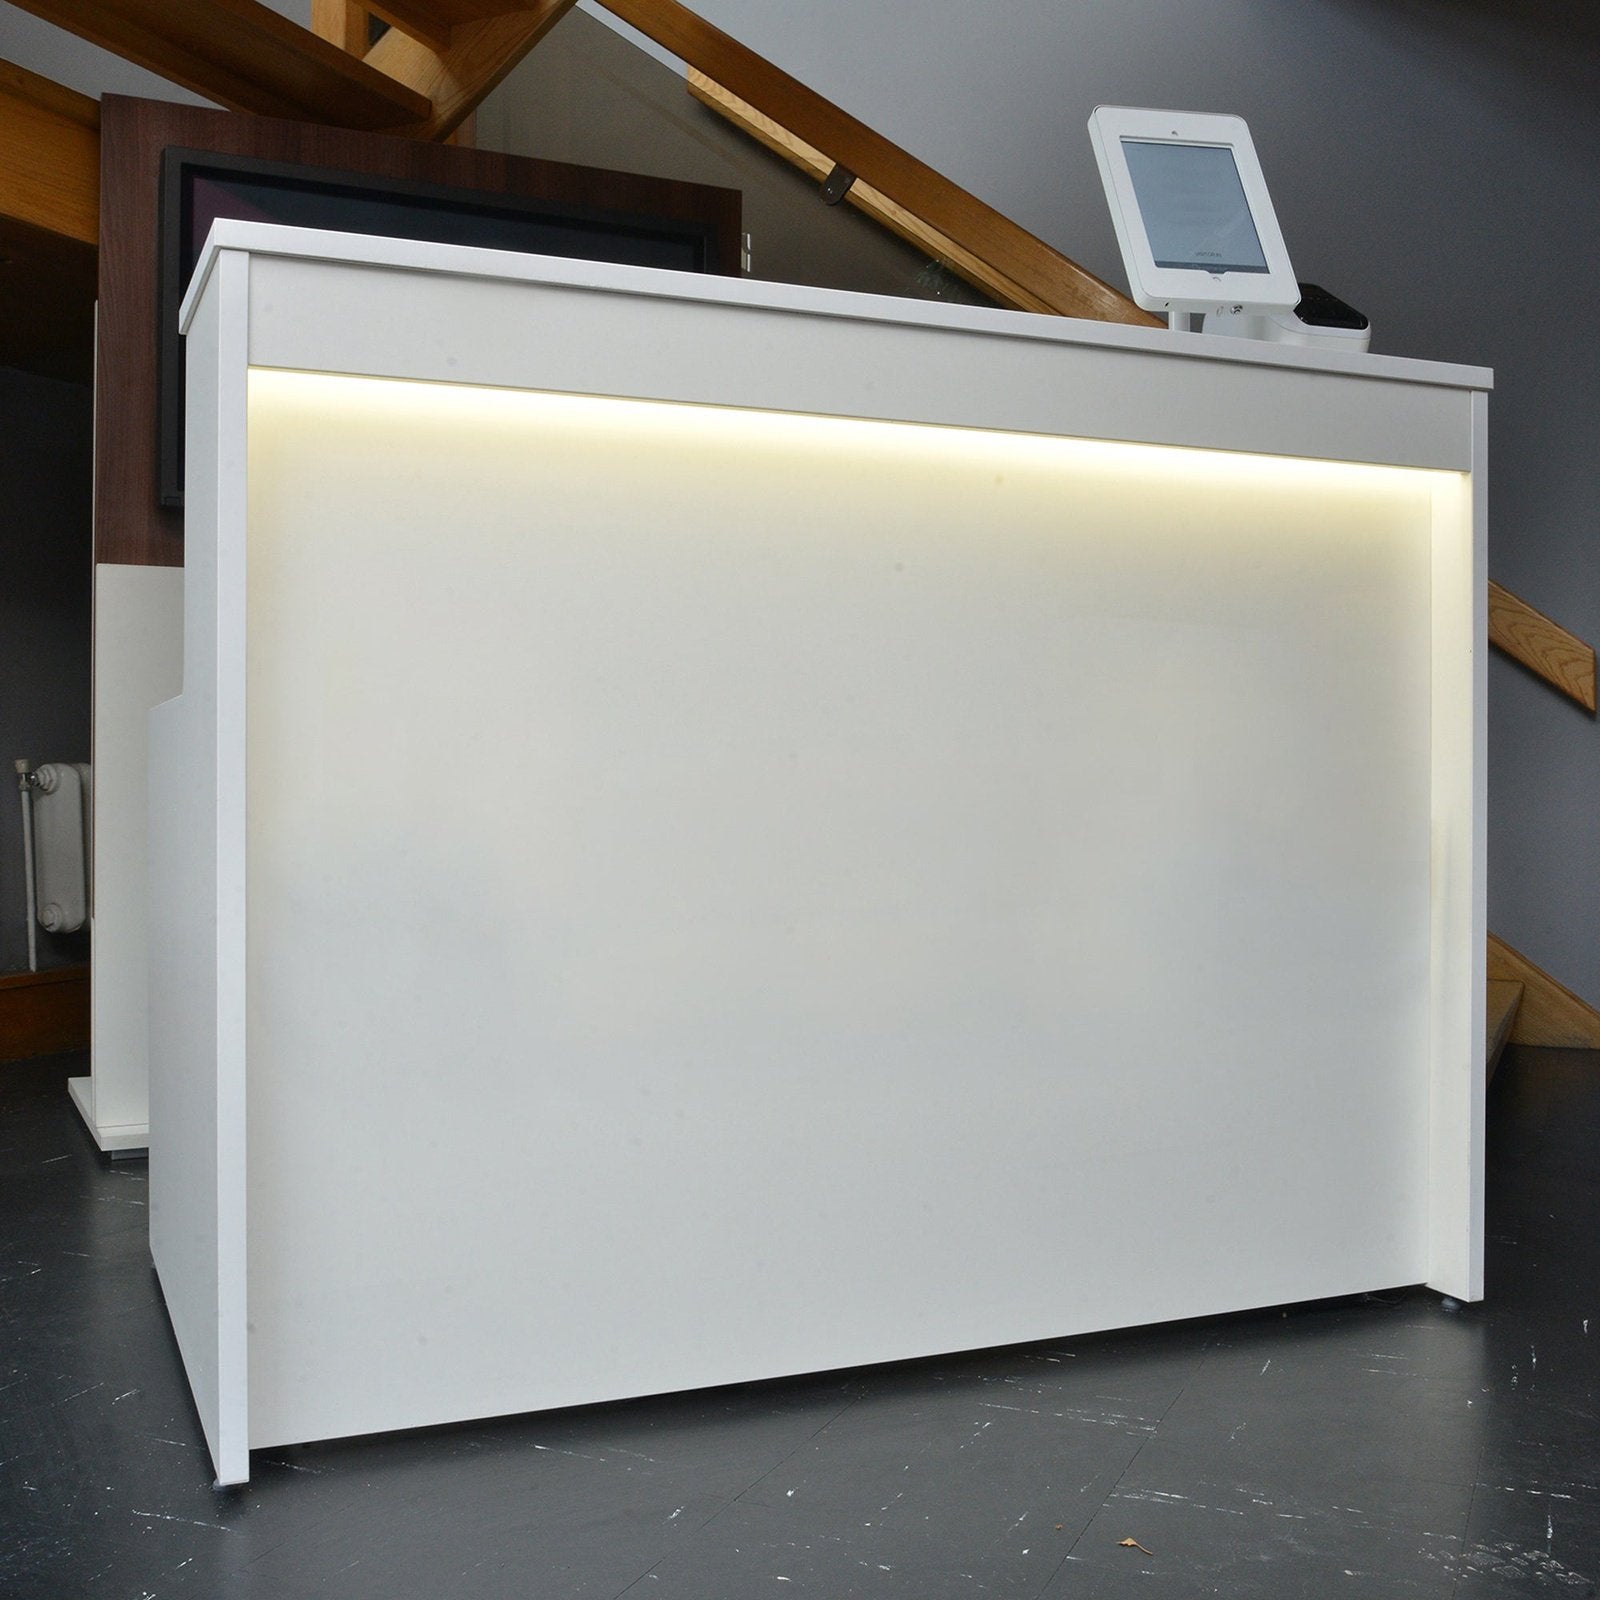 Welcome reception desk - Office Products Online